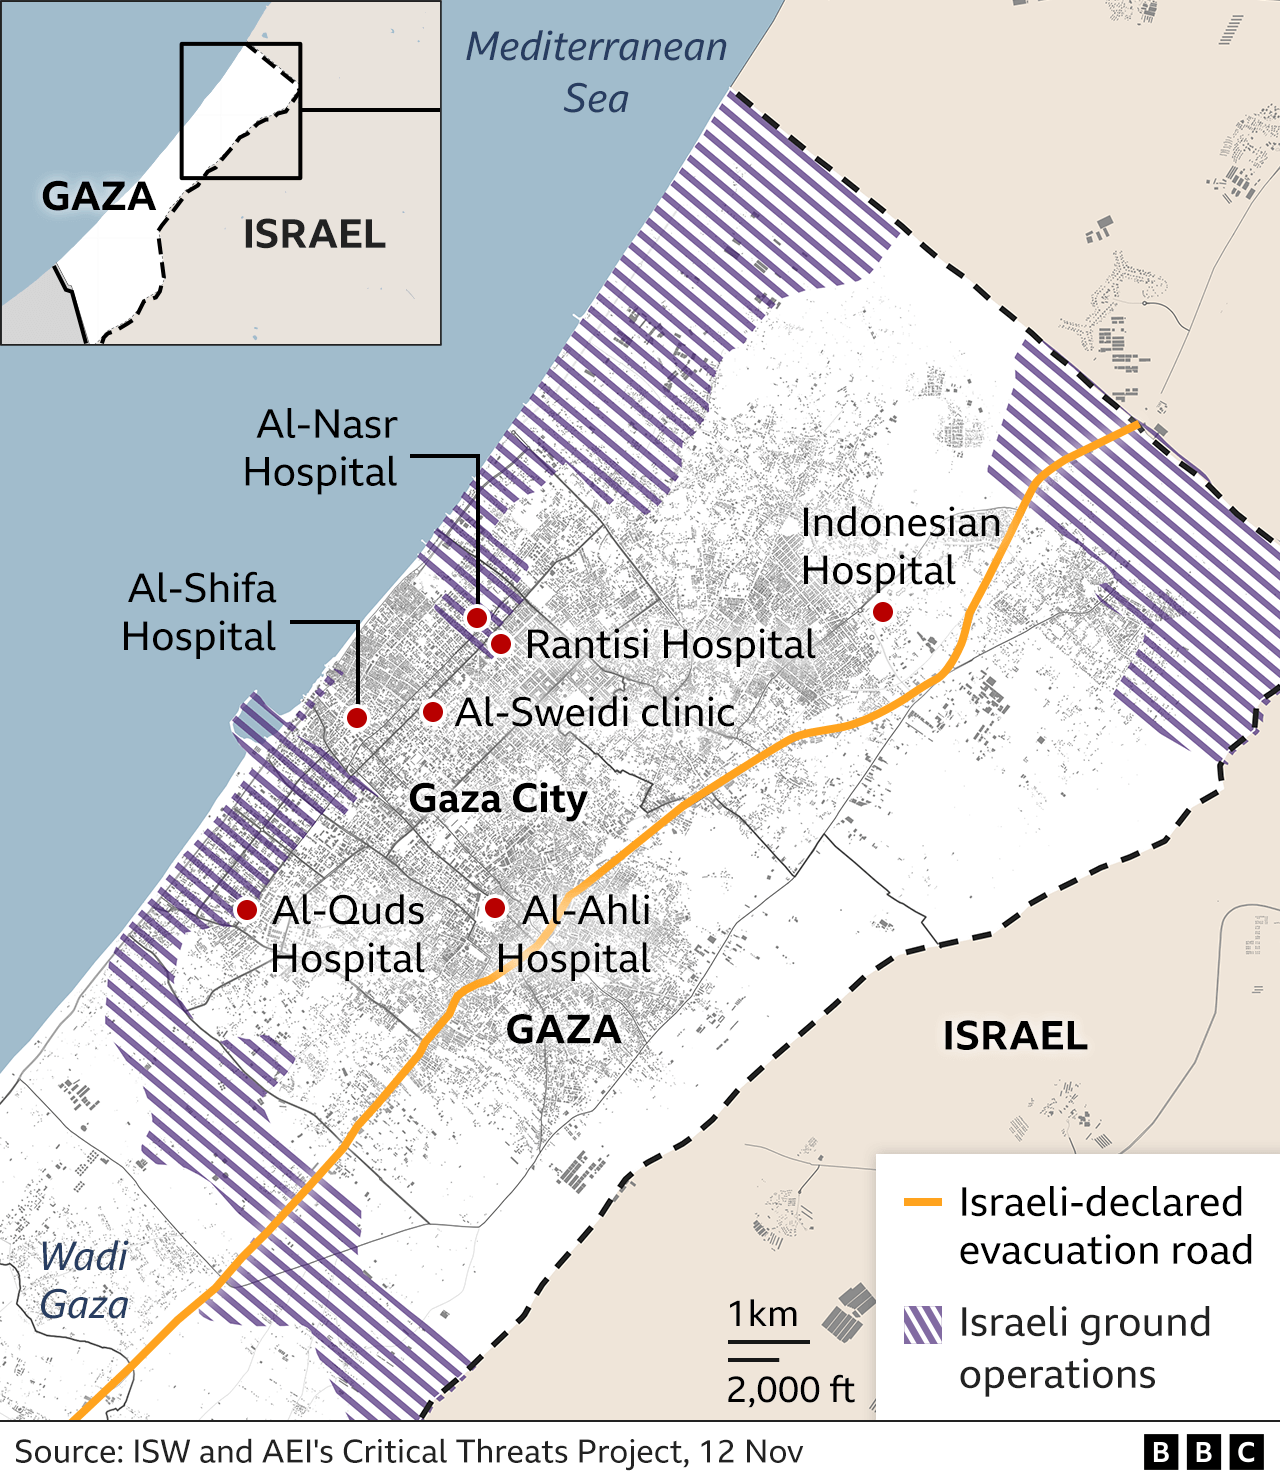 A map showing hospitals in the Gaza Strip alongside Israeli ground operations